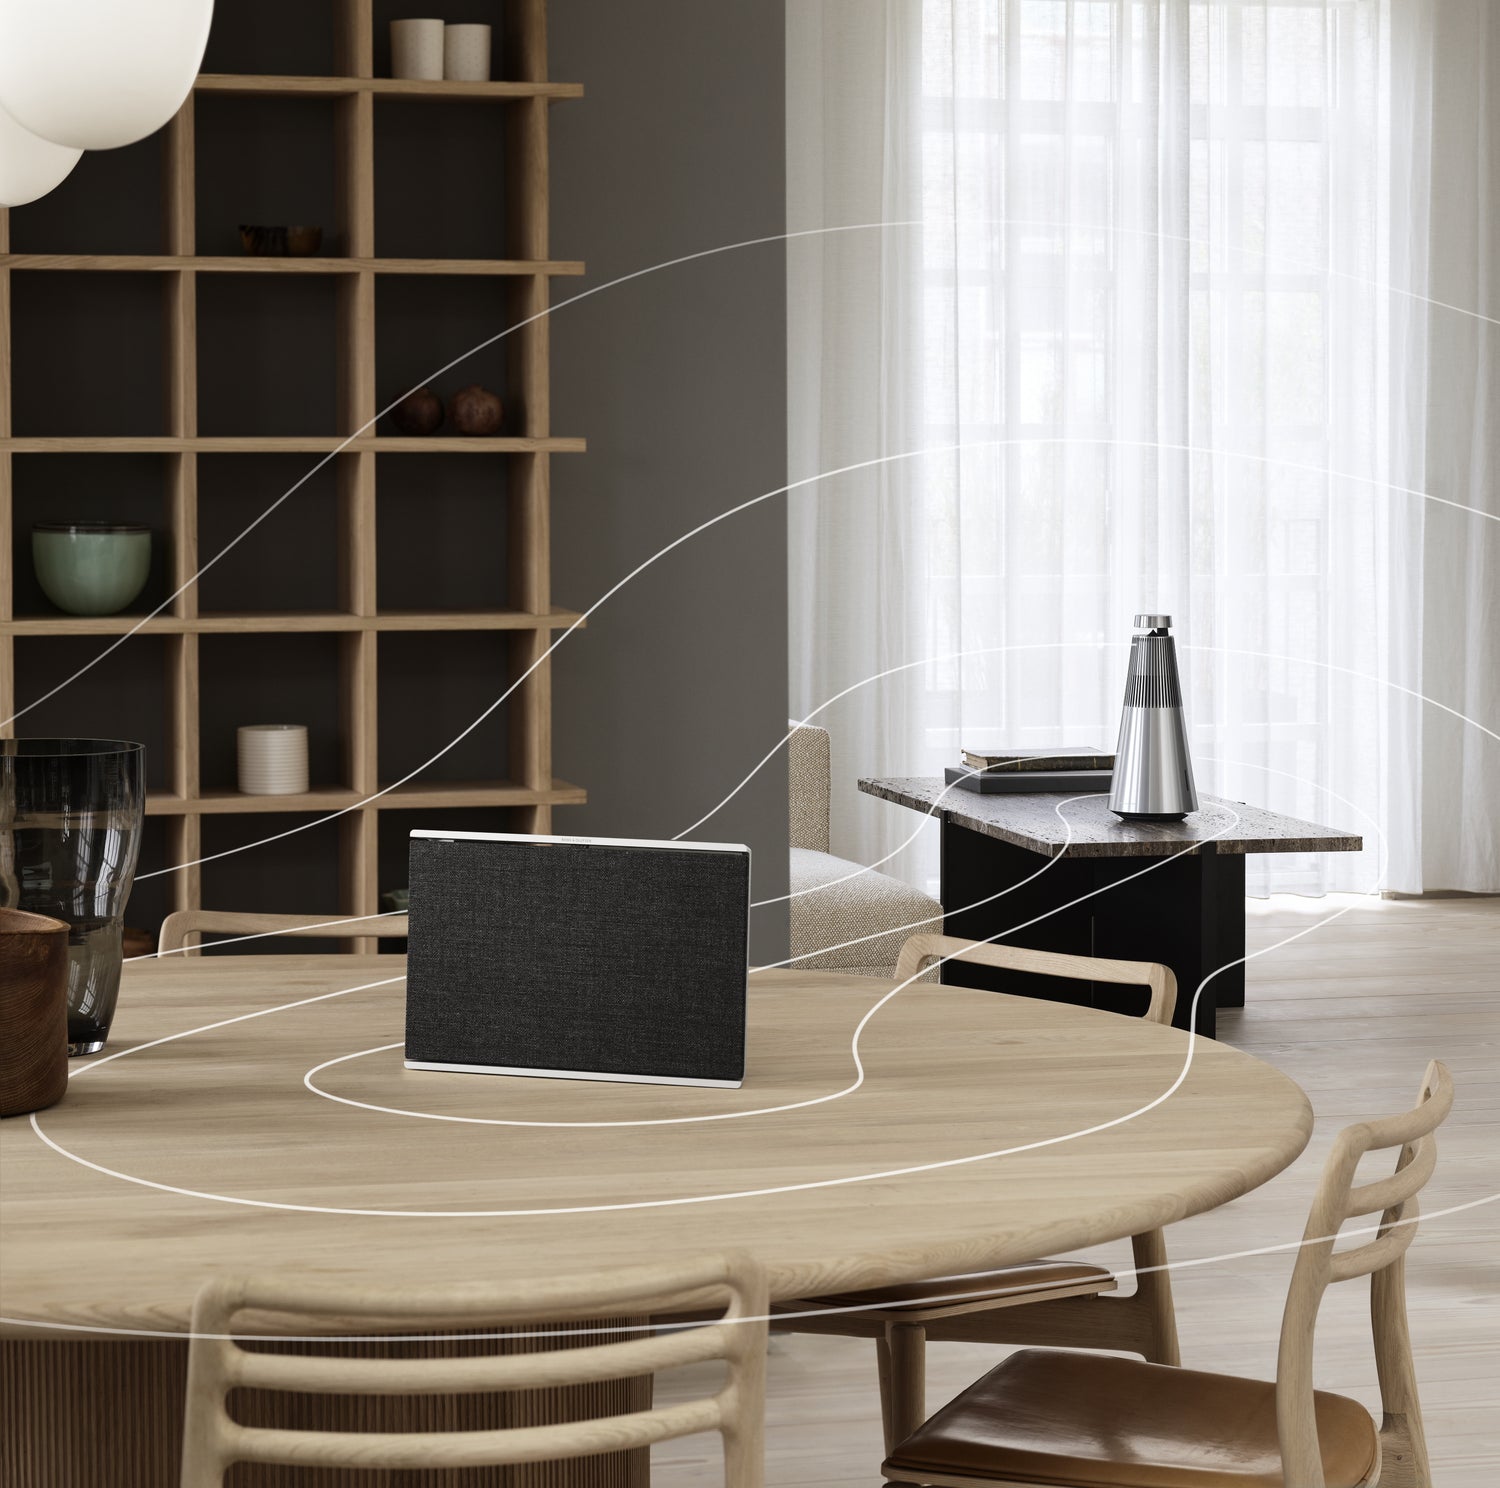 Sounds Better Together - Bang & Olufsen Connected Speakers